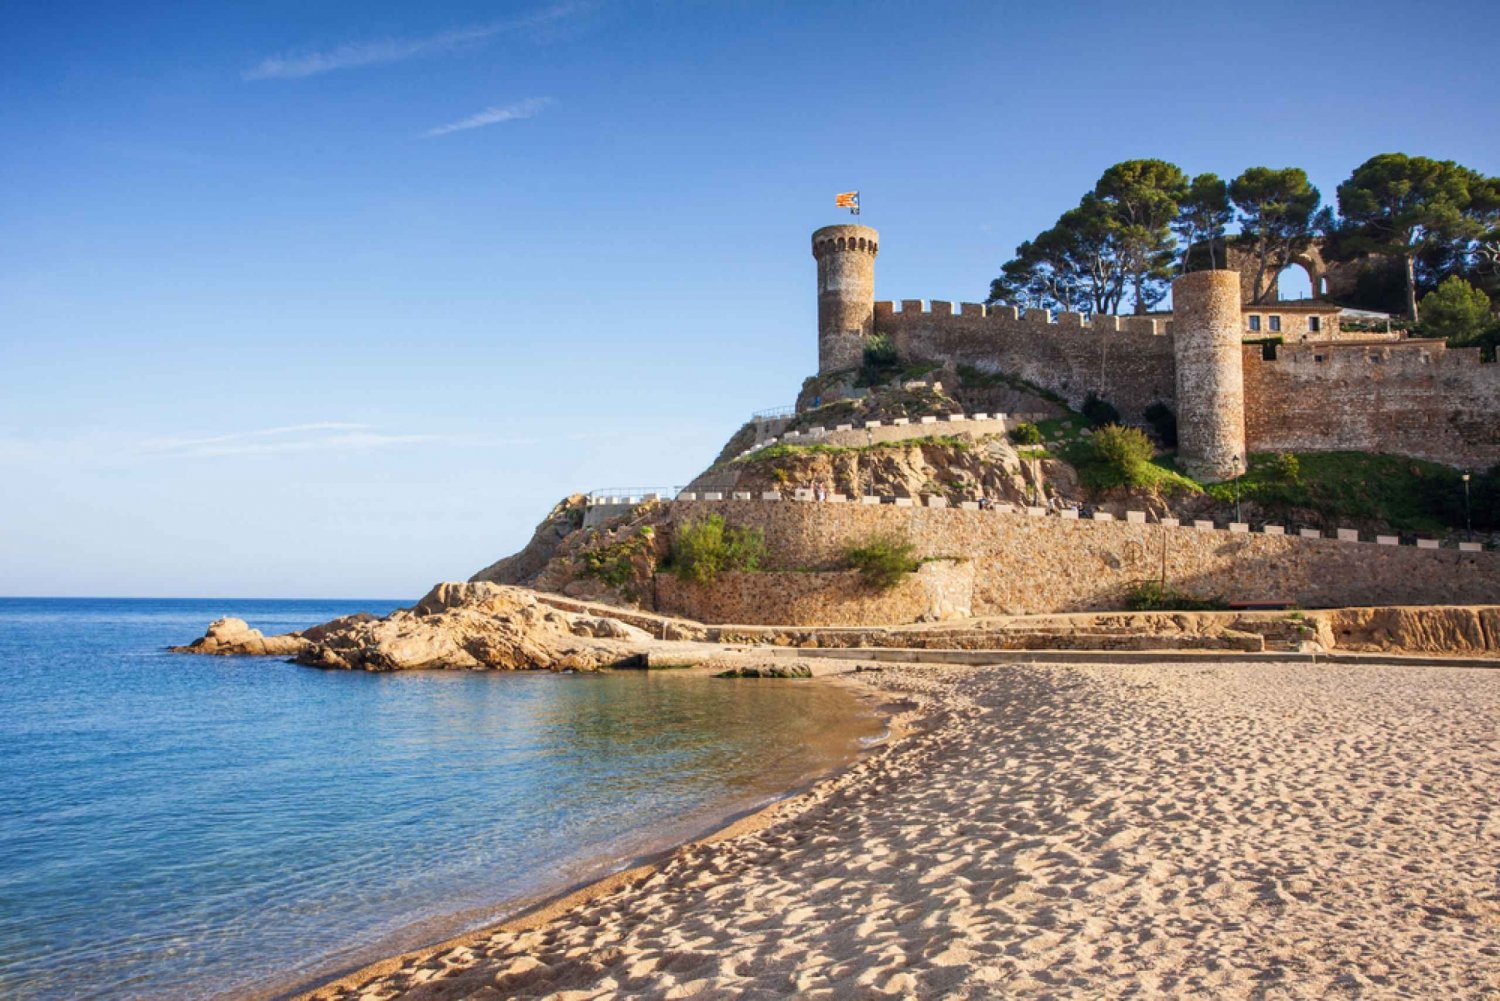 Discover the Costa Brava Full-Day Tour from Barcelona